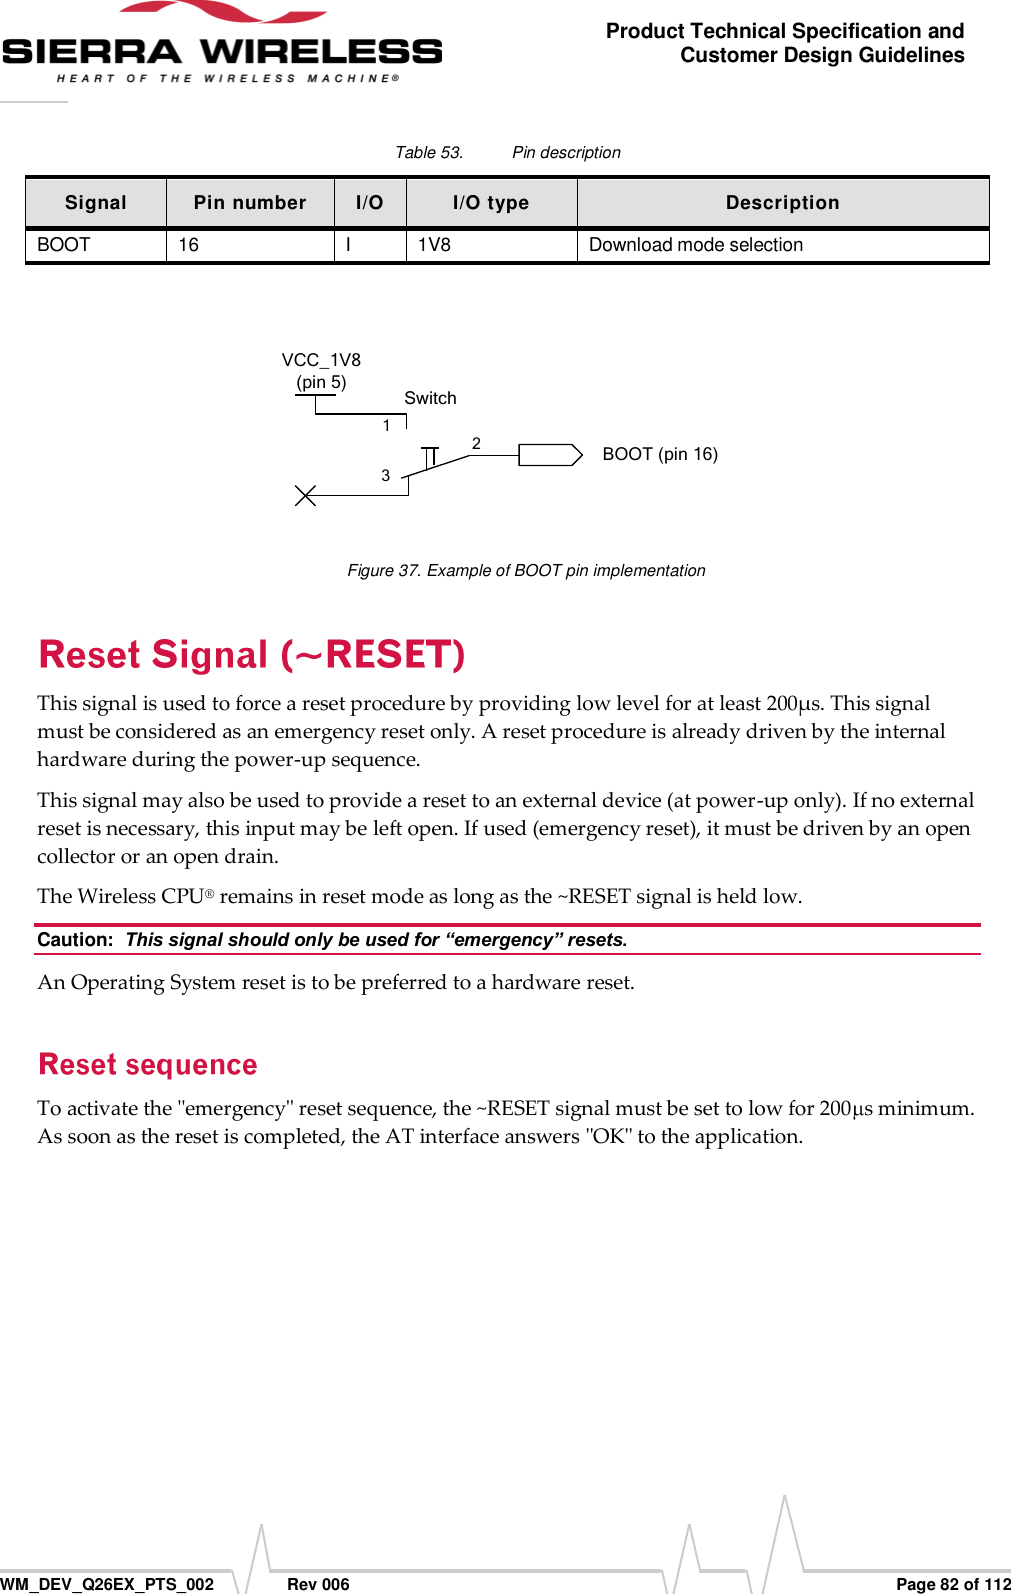      WM_DEV_Q26EX_PTS_002  Rev 006  Page 82 of 112 Product Technical Specification and Customer Design Guidelines Table 53.  Pin description Signal Pin number I/O I/O type Description BOOT 16 I 1V8 Download mode selection   123SwitchBOOT (pin 16)VCC_1V8 (pin 5) Figure 37. Example of BOOT pin implementation This signal is used to force a reset procedure by providing low level for at least 200µs. This signal must be considered as an emergency reset only. A reset procedure is already driven by the internal hardware during the power-up sequence. This signal may also be used to provide a reset to an external device (at power-up only). If no external reset is necessary, this input may be left open. If used (emergency reset), it must be driven by an open collector or an open drain. The Wireless CPU® remains in reset mode as long as the ~RESET signal is held low. Caution:  This signal should only be used for “emergency” resets. An Operating System reset is to be preferred to a hardware reset. To activate the &quot;emergency&quot; reset sequence, the ~RESET signal must be set to low for 200 s minimum. As soon as the reset is completed, the AT interface answers &quot;OK&quot; to the application. 